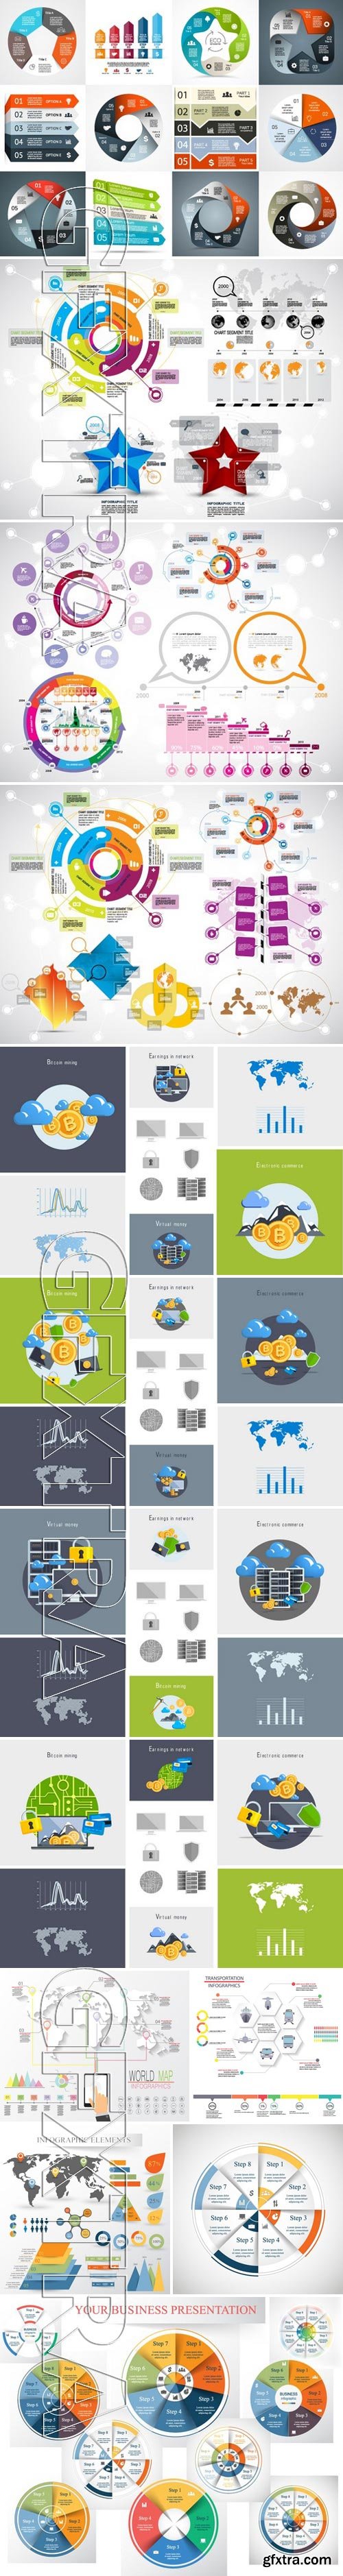 Stock Vectors - Collection of infographic templates for business